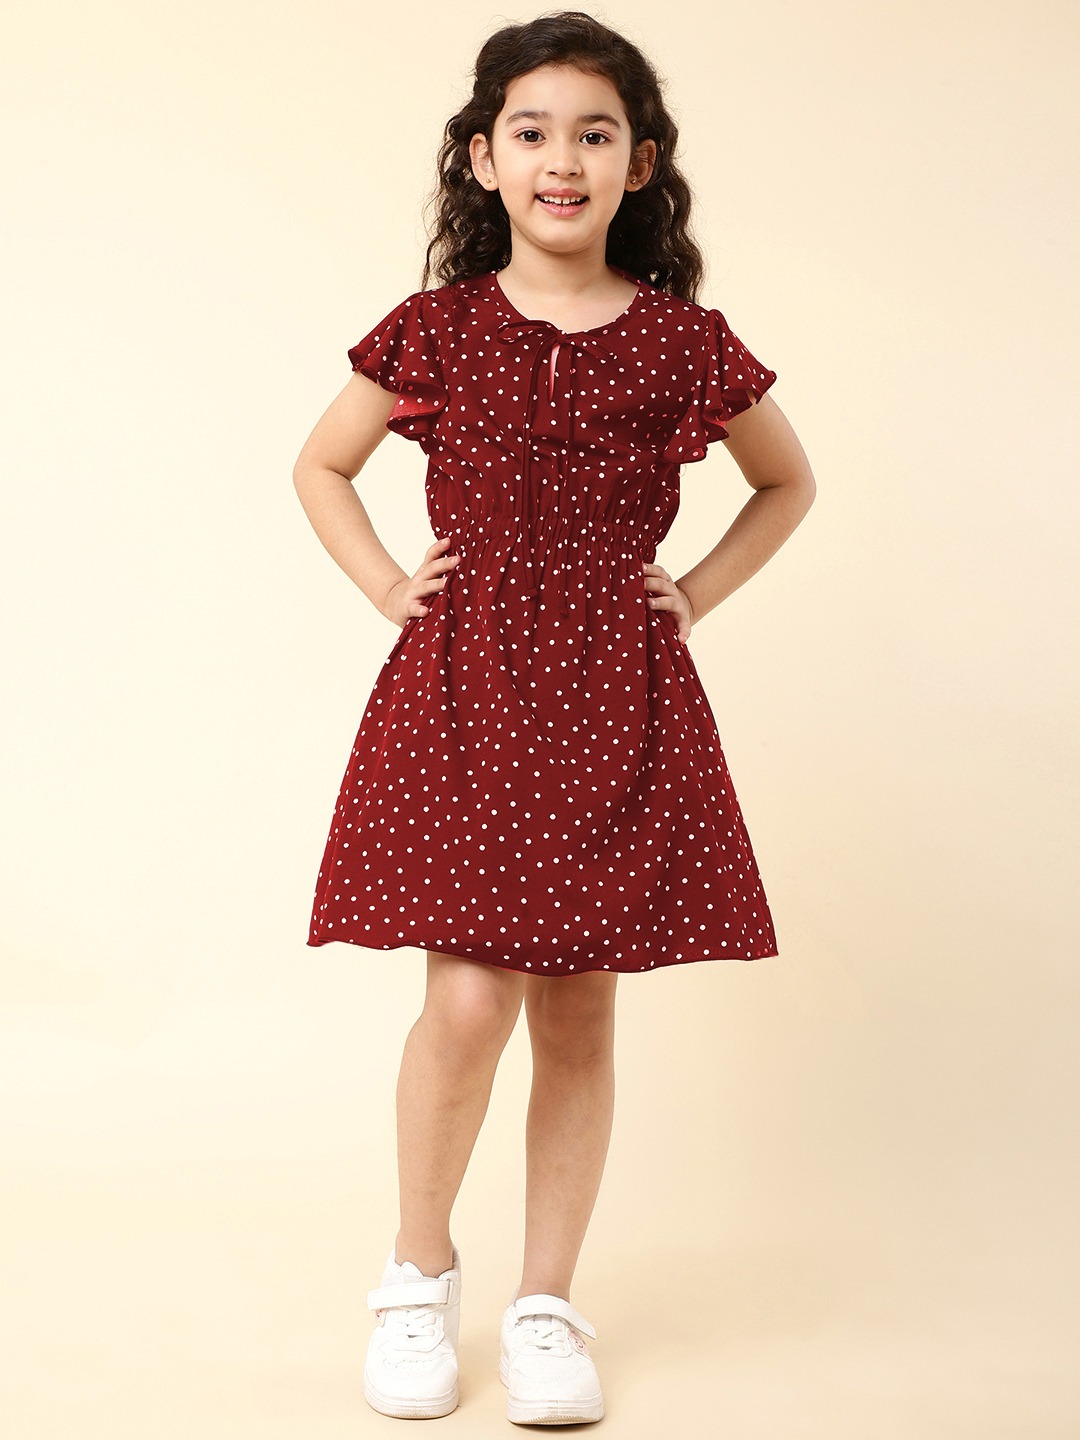 Retro Pinup Rockabilly Polka Dot Dress - Red | Double Trouble Apparel